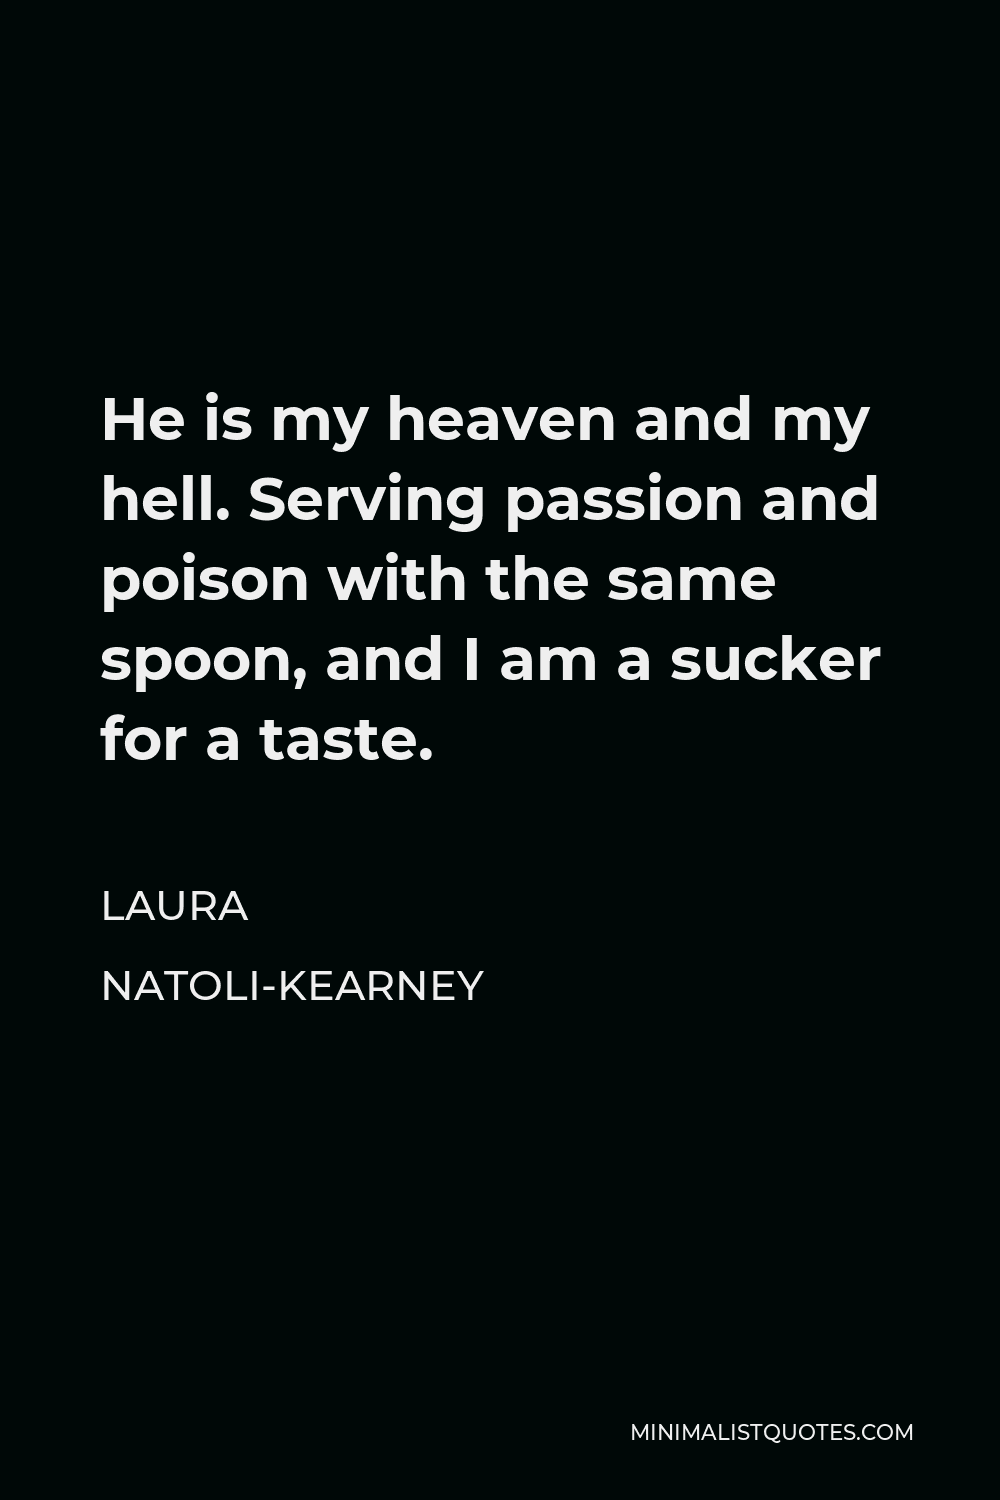 Laura Natoli-Kearney Quote - He is my heaven and my hell. Serving passion and poison with the same spoon, and I am a sucker for a taste.